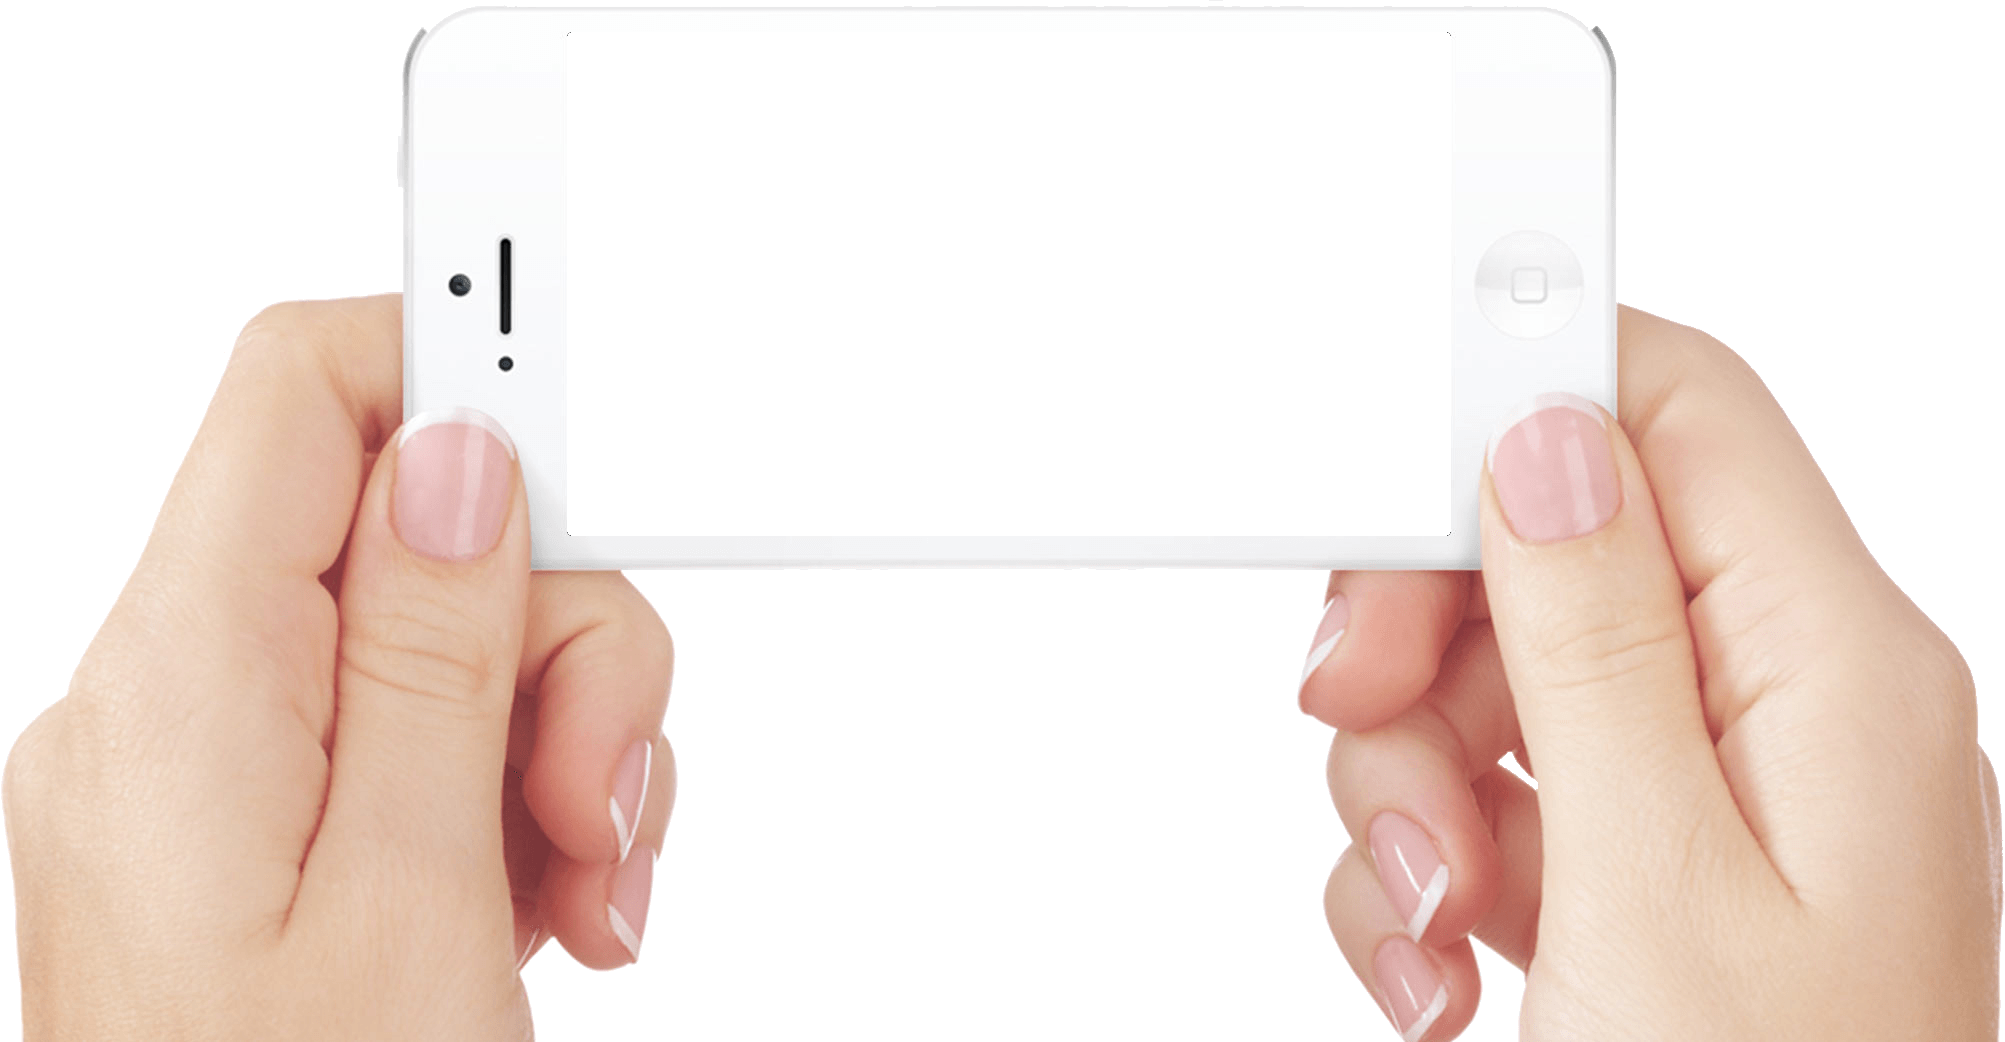 Iphone In Hands Transparent Png Image PNG Image